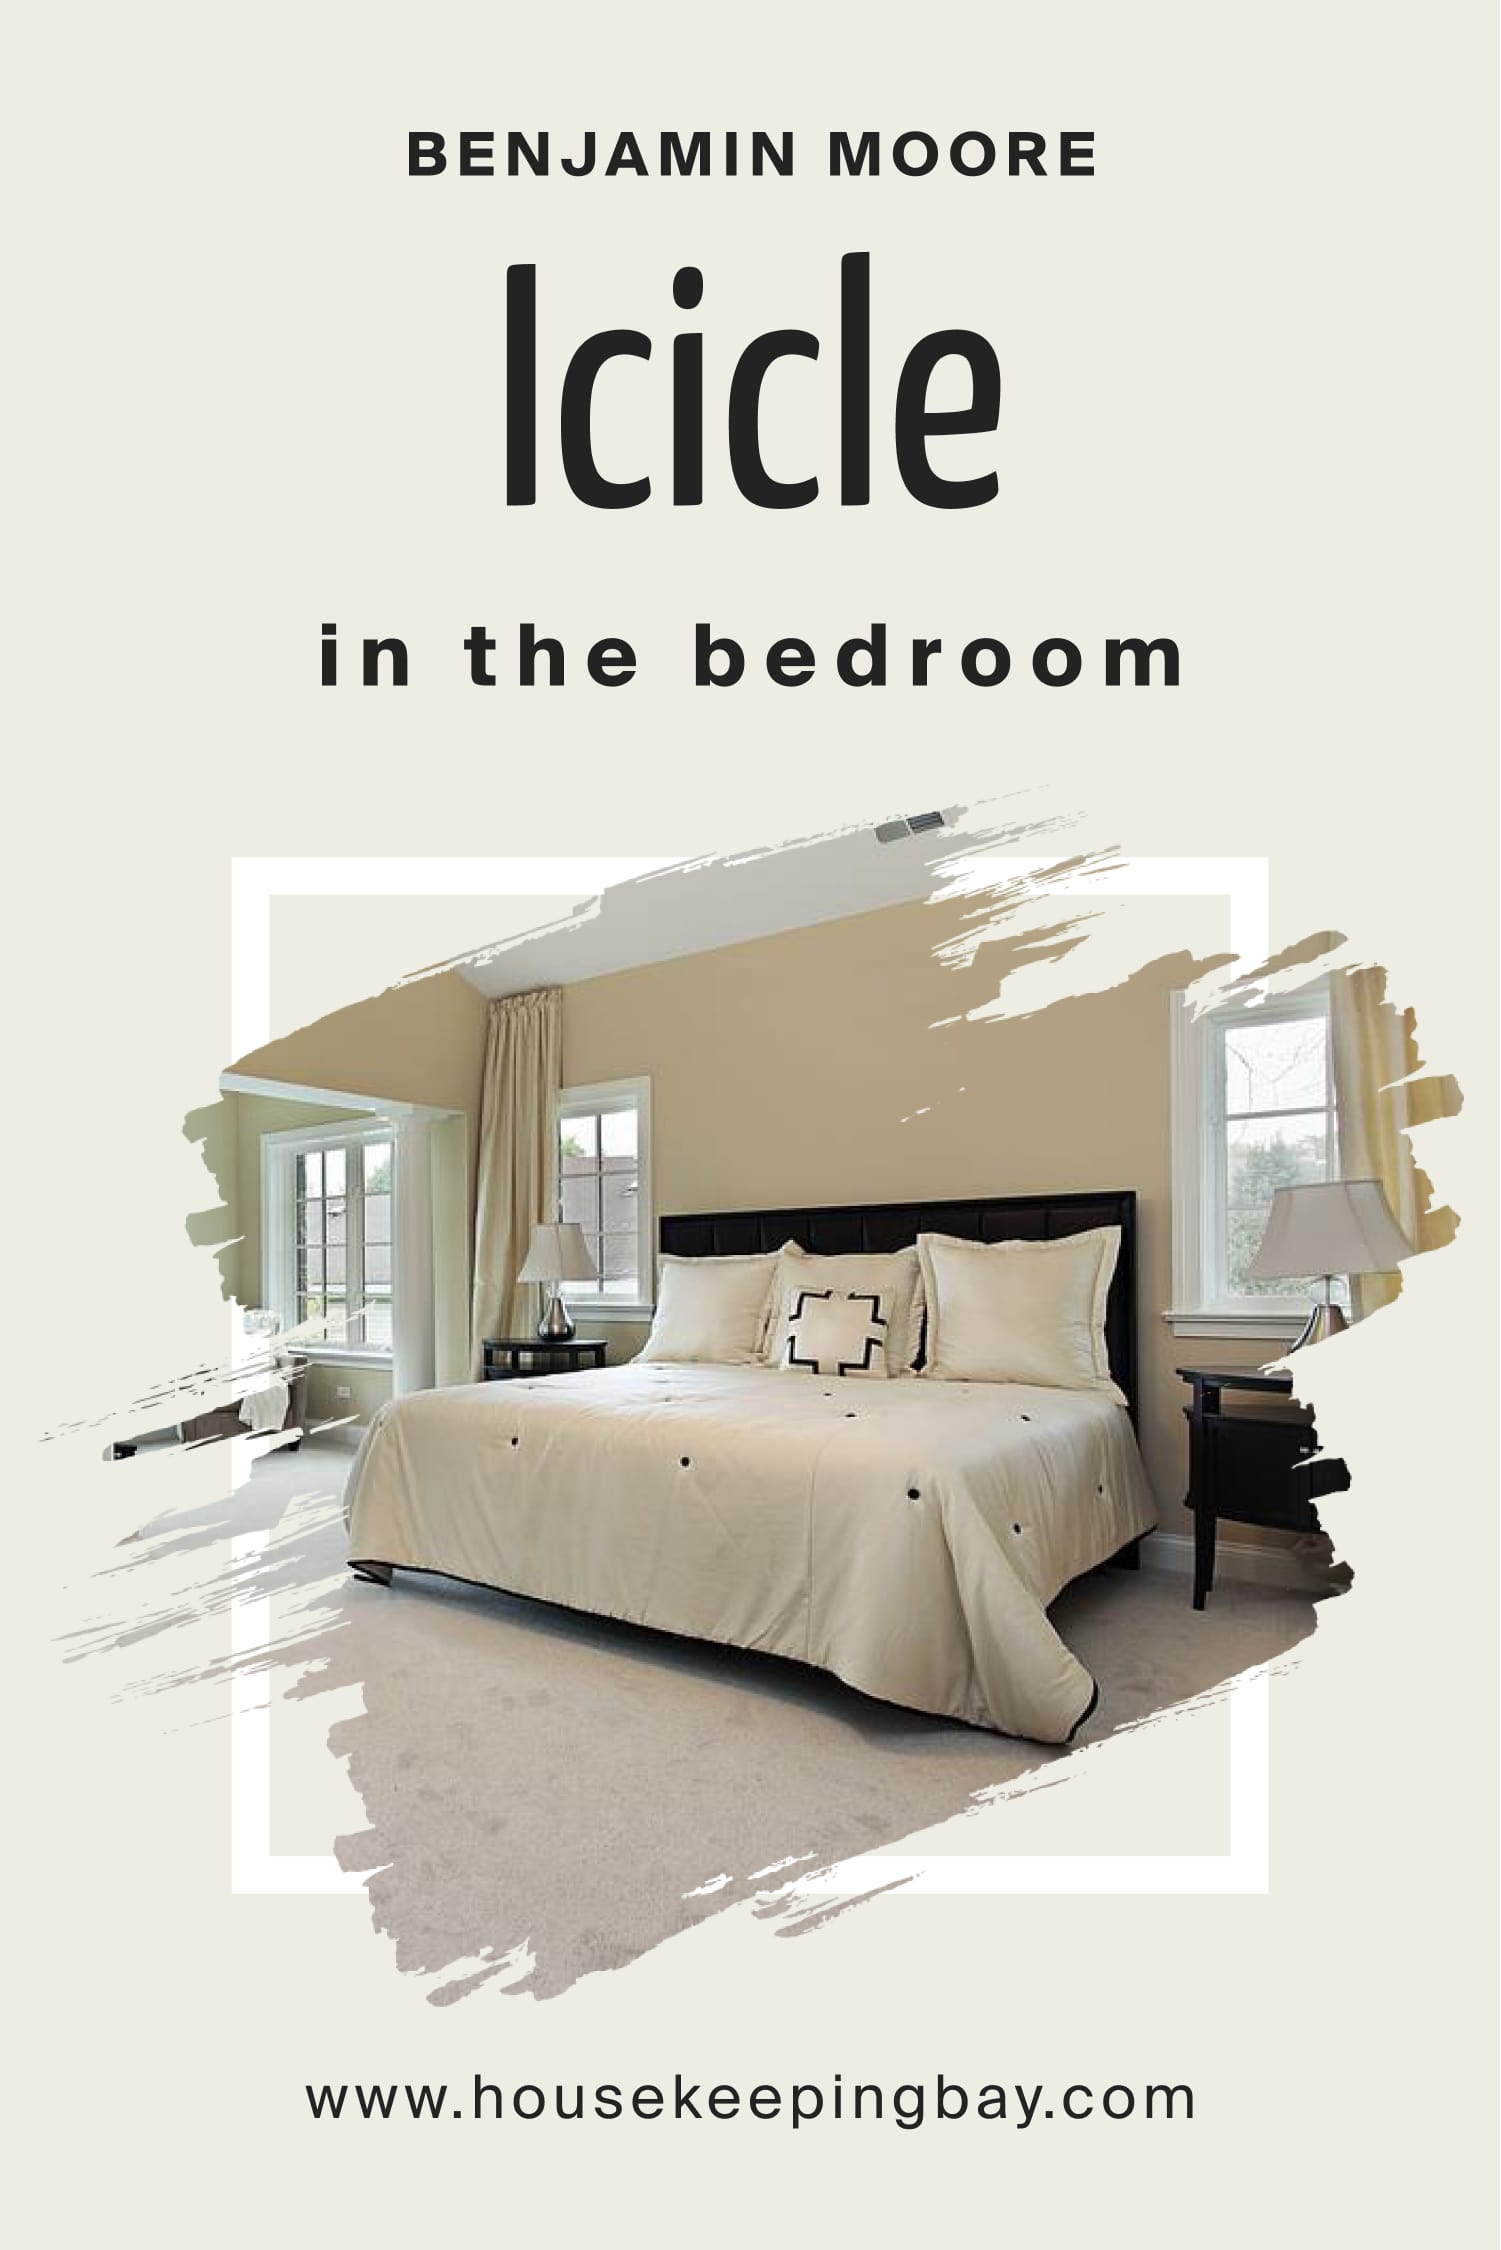 Benjamin Moore. Icicle 2142 70 for the Bedroom